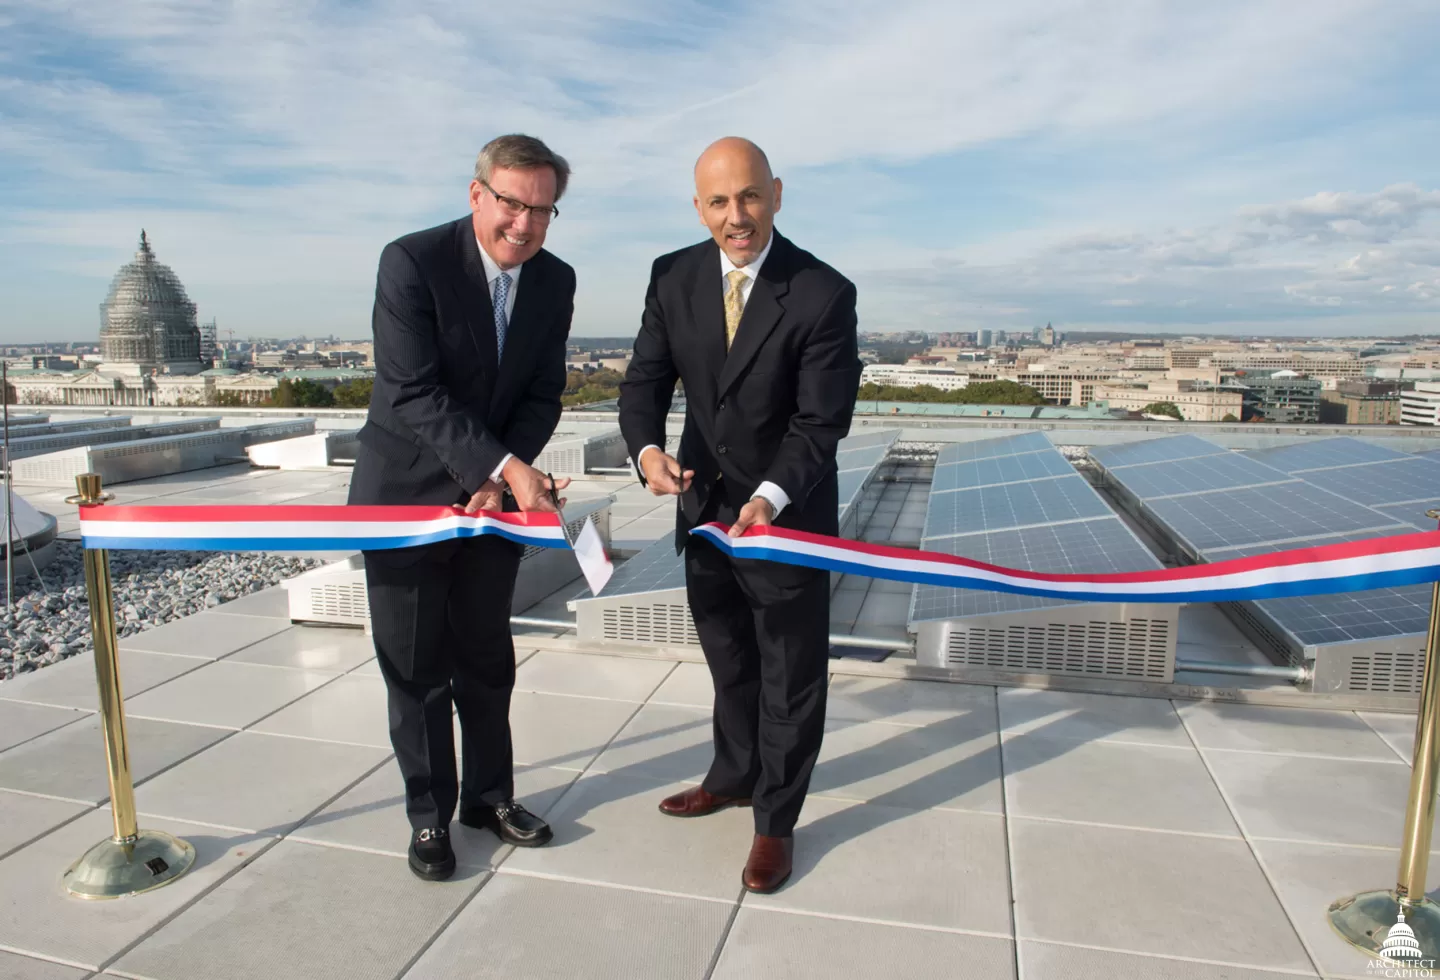 Two people at a ribbon cutting ceremony.